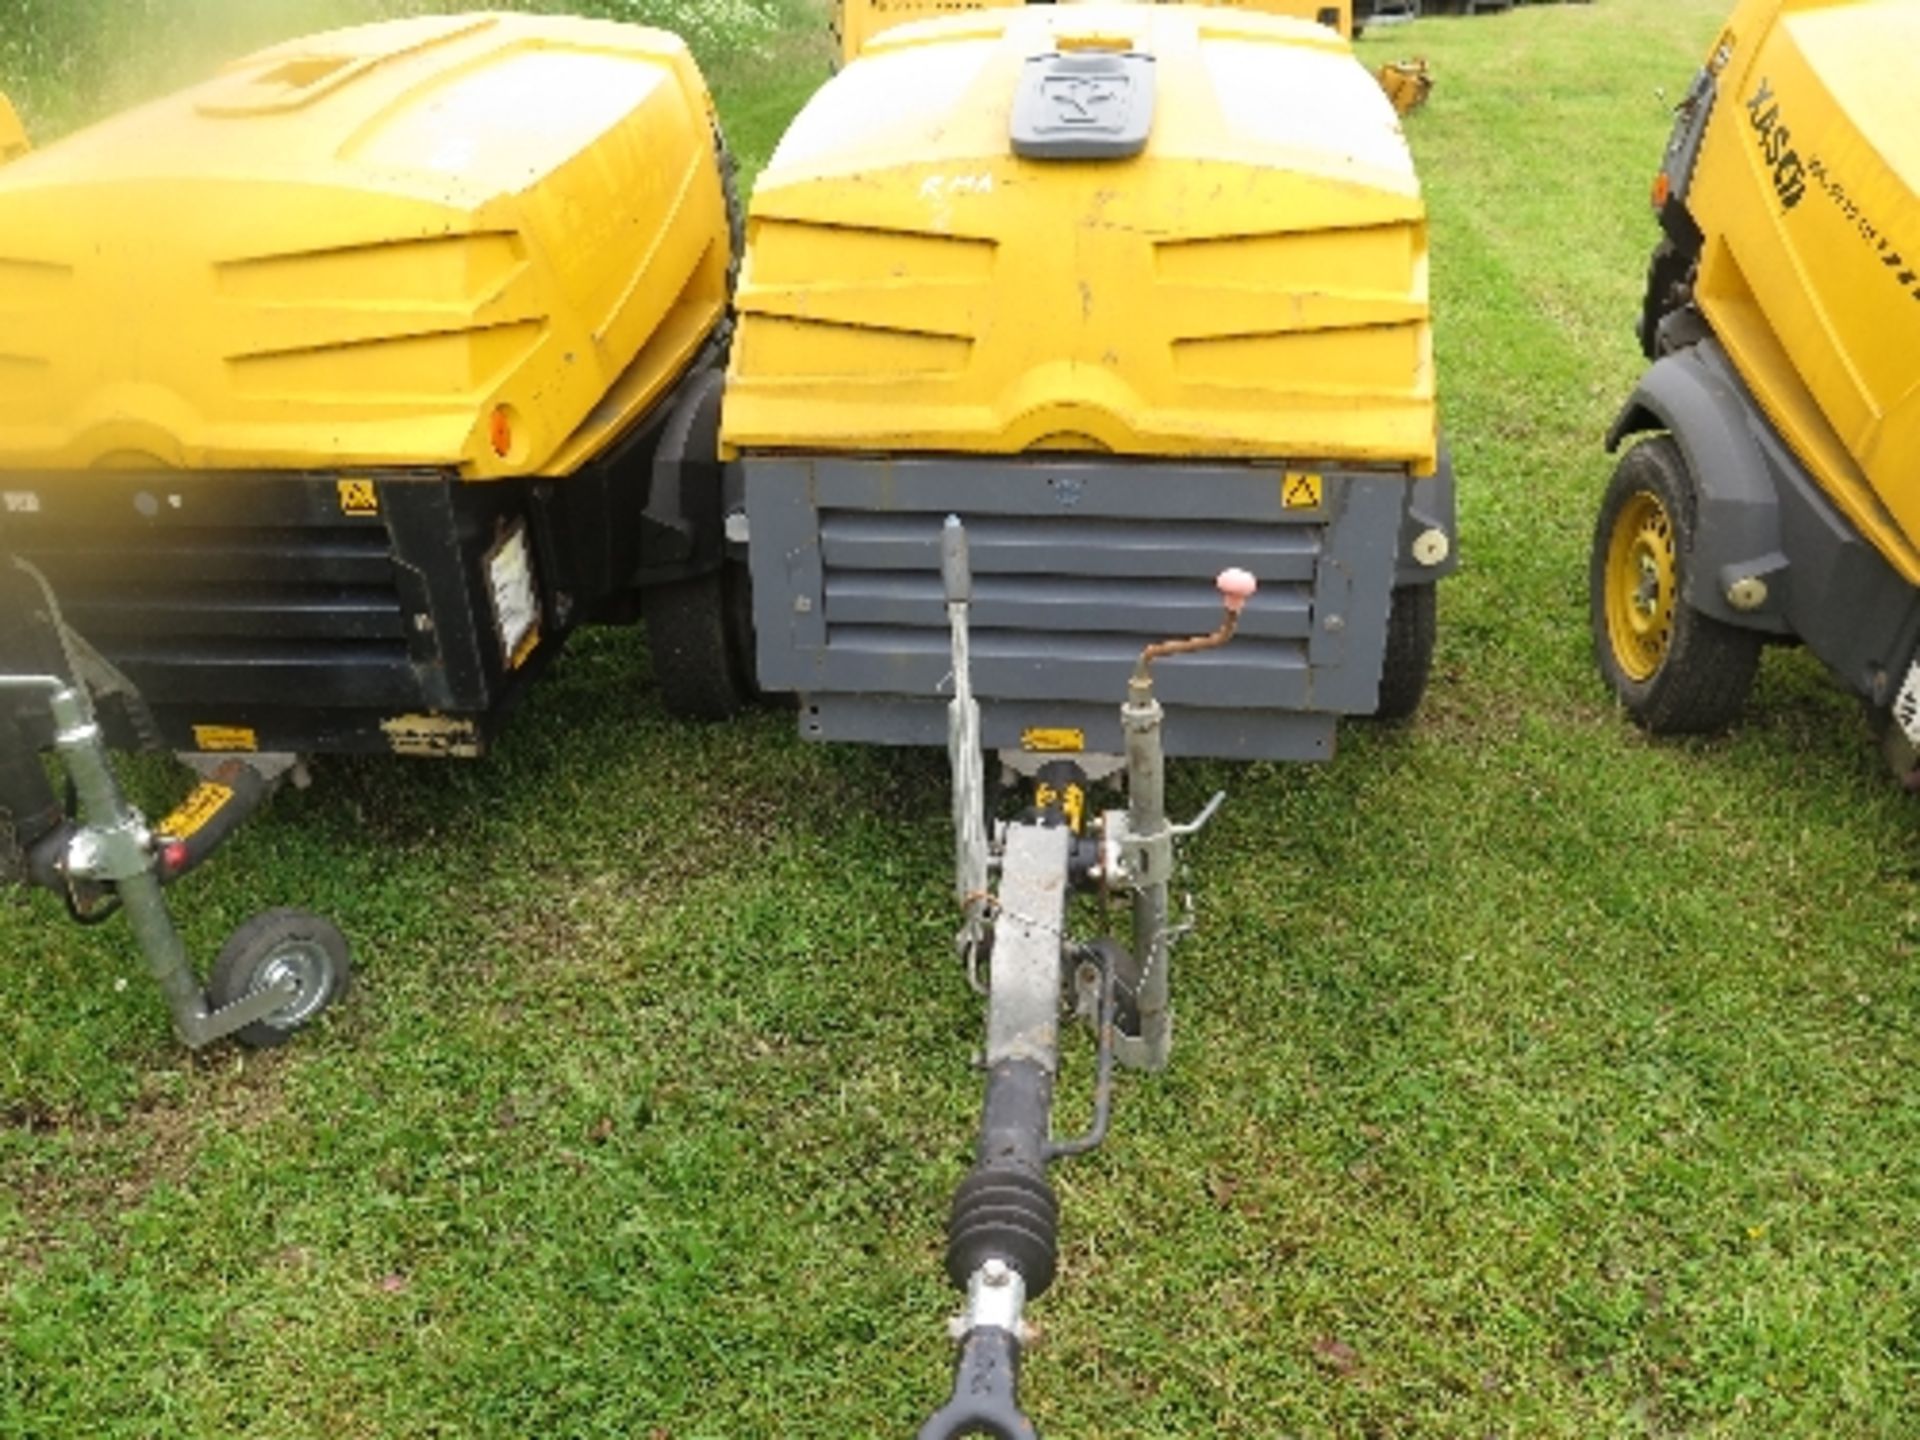 Atlas Copco XAS47 compressor 2008 5002443
618 HOURS - KUBOTA POWER - RUNS AND MAKES AIR
ALL LOTS - Image 3 of 5